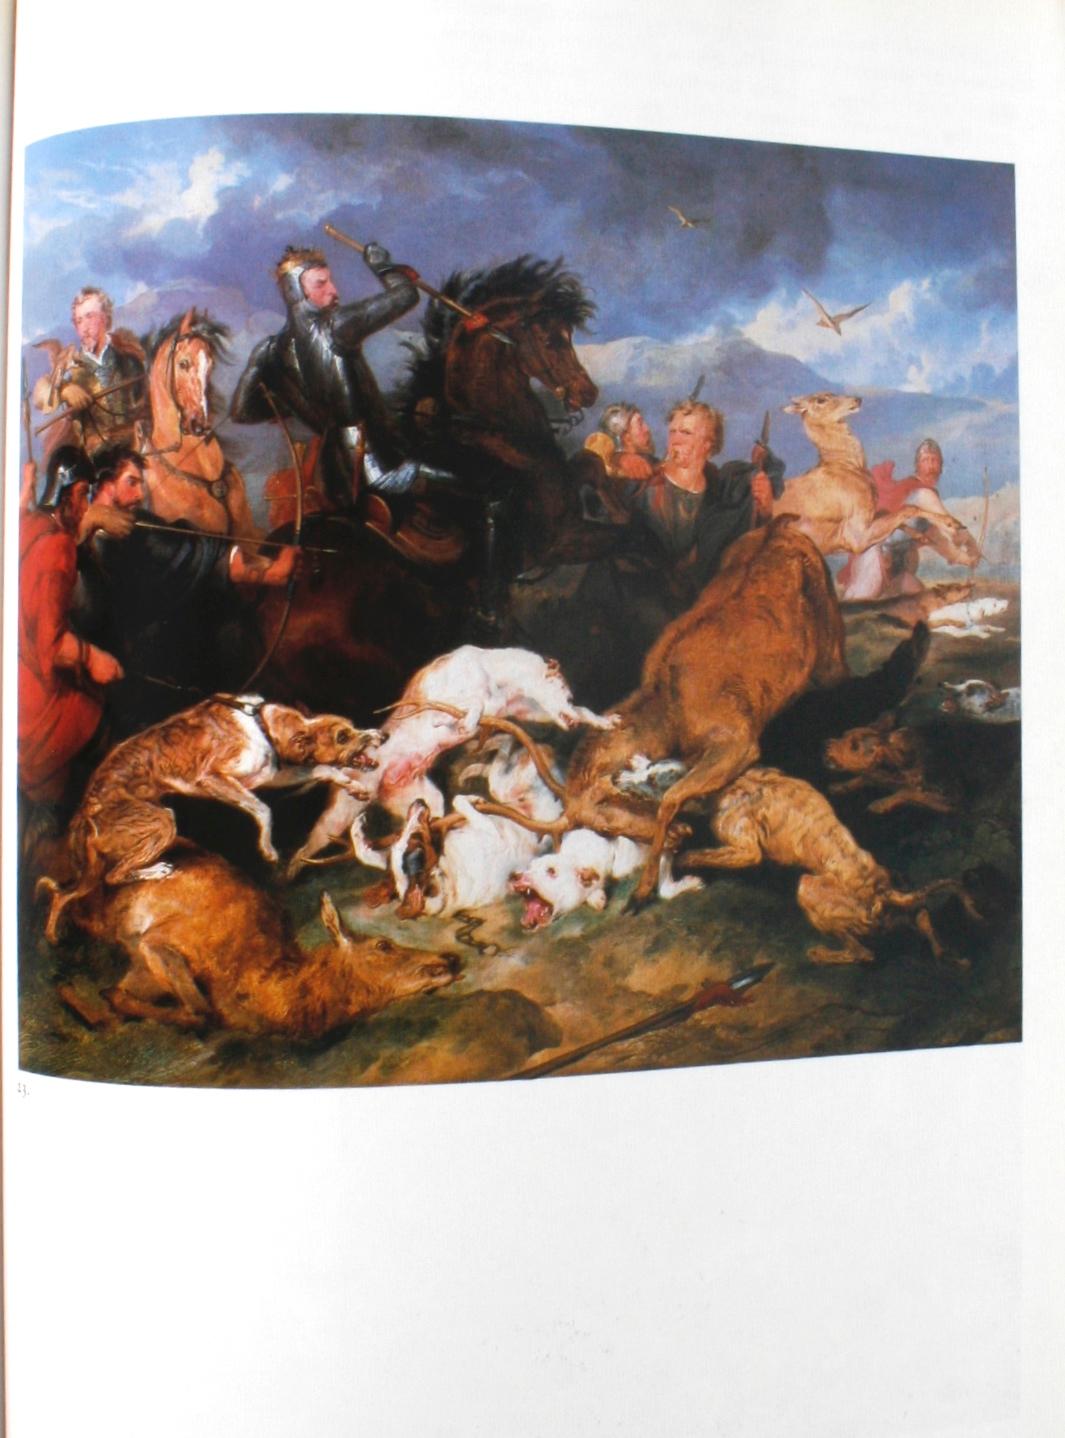 Sir Edwin Landseer, Exhibition Catalogue by Richard Ormond In Good Condition In valatie, NY